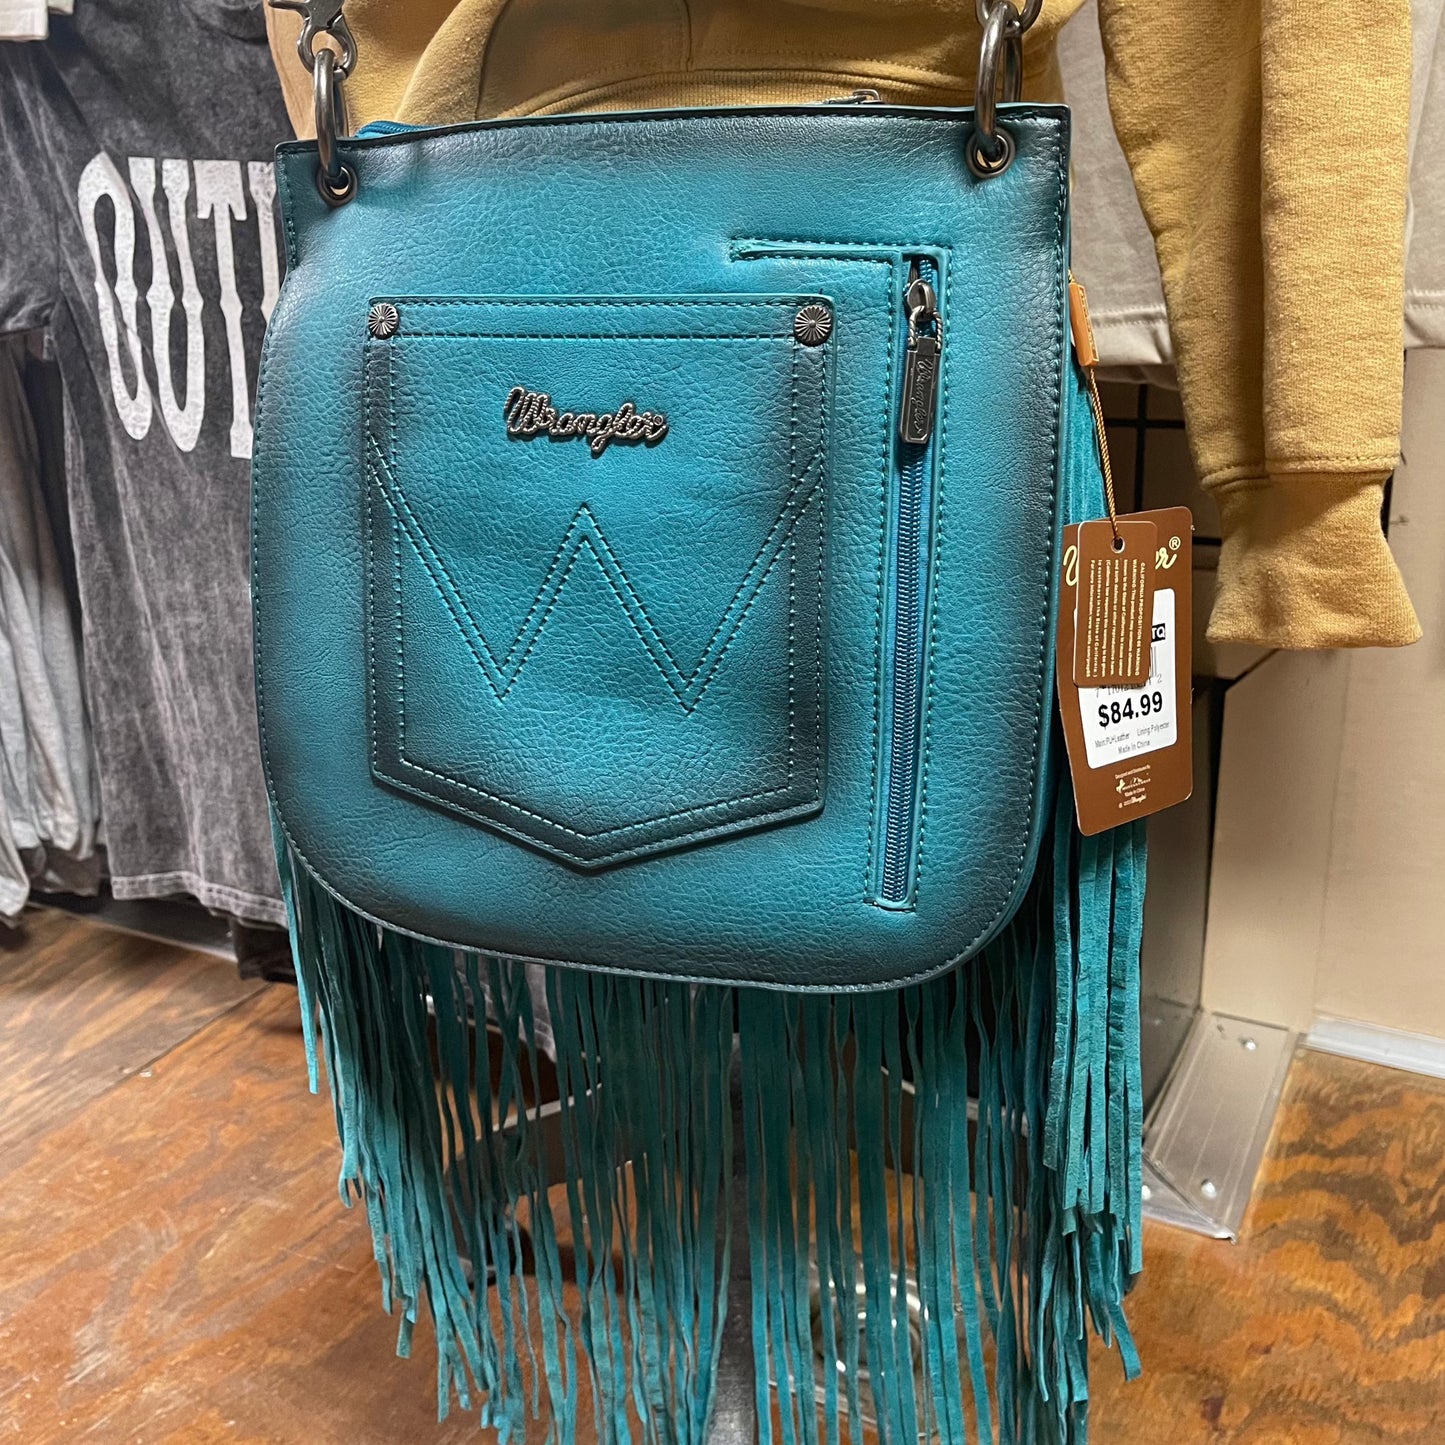 Back view of the turquoise rivet detailed crossbody bag showcasing the wrangler pocket and the zipper closure concealed carry compartment